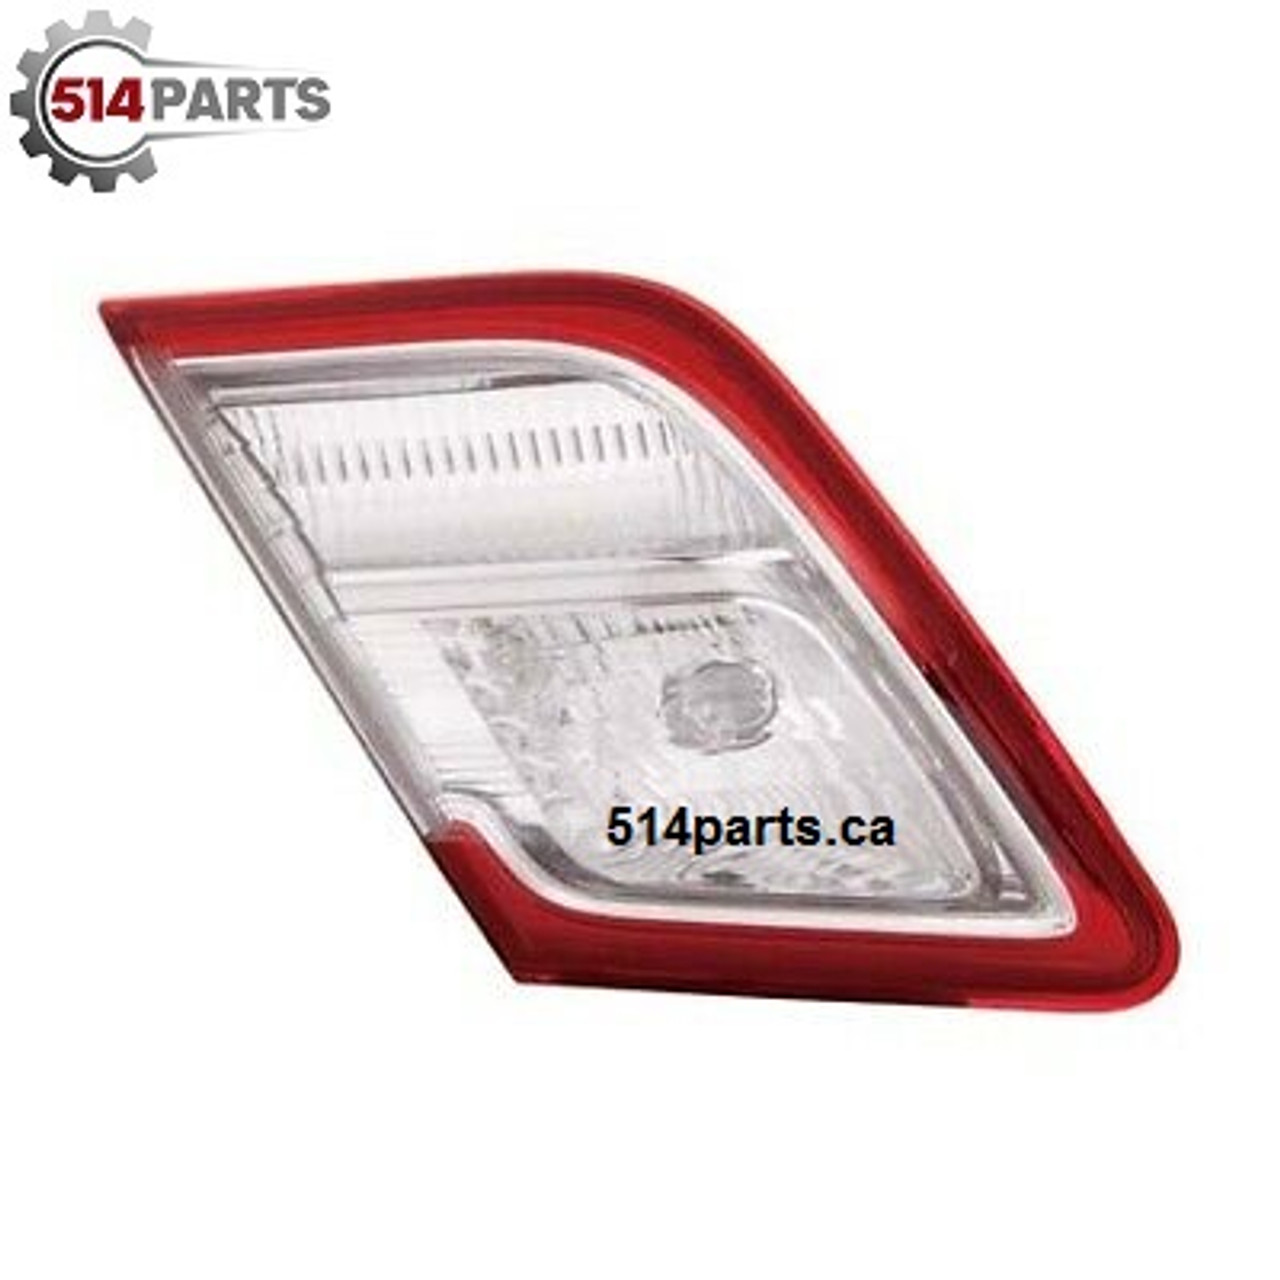 2010 - 2011 TOYOTA CAMRY HYBRID USA BUILT MODELS Inner TAIL LIGHTS(BACK-UP LAMP) High Quality - PHARES ARRIERE Interne(LAMPE DE RECUL) Haute Qualite